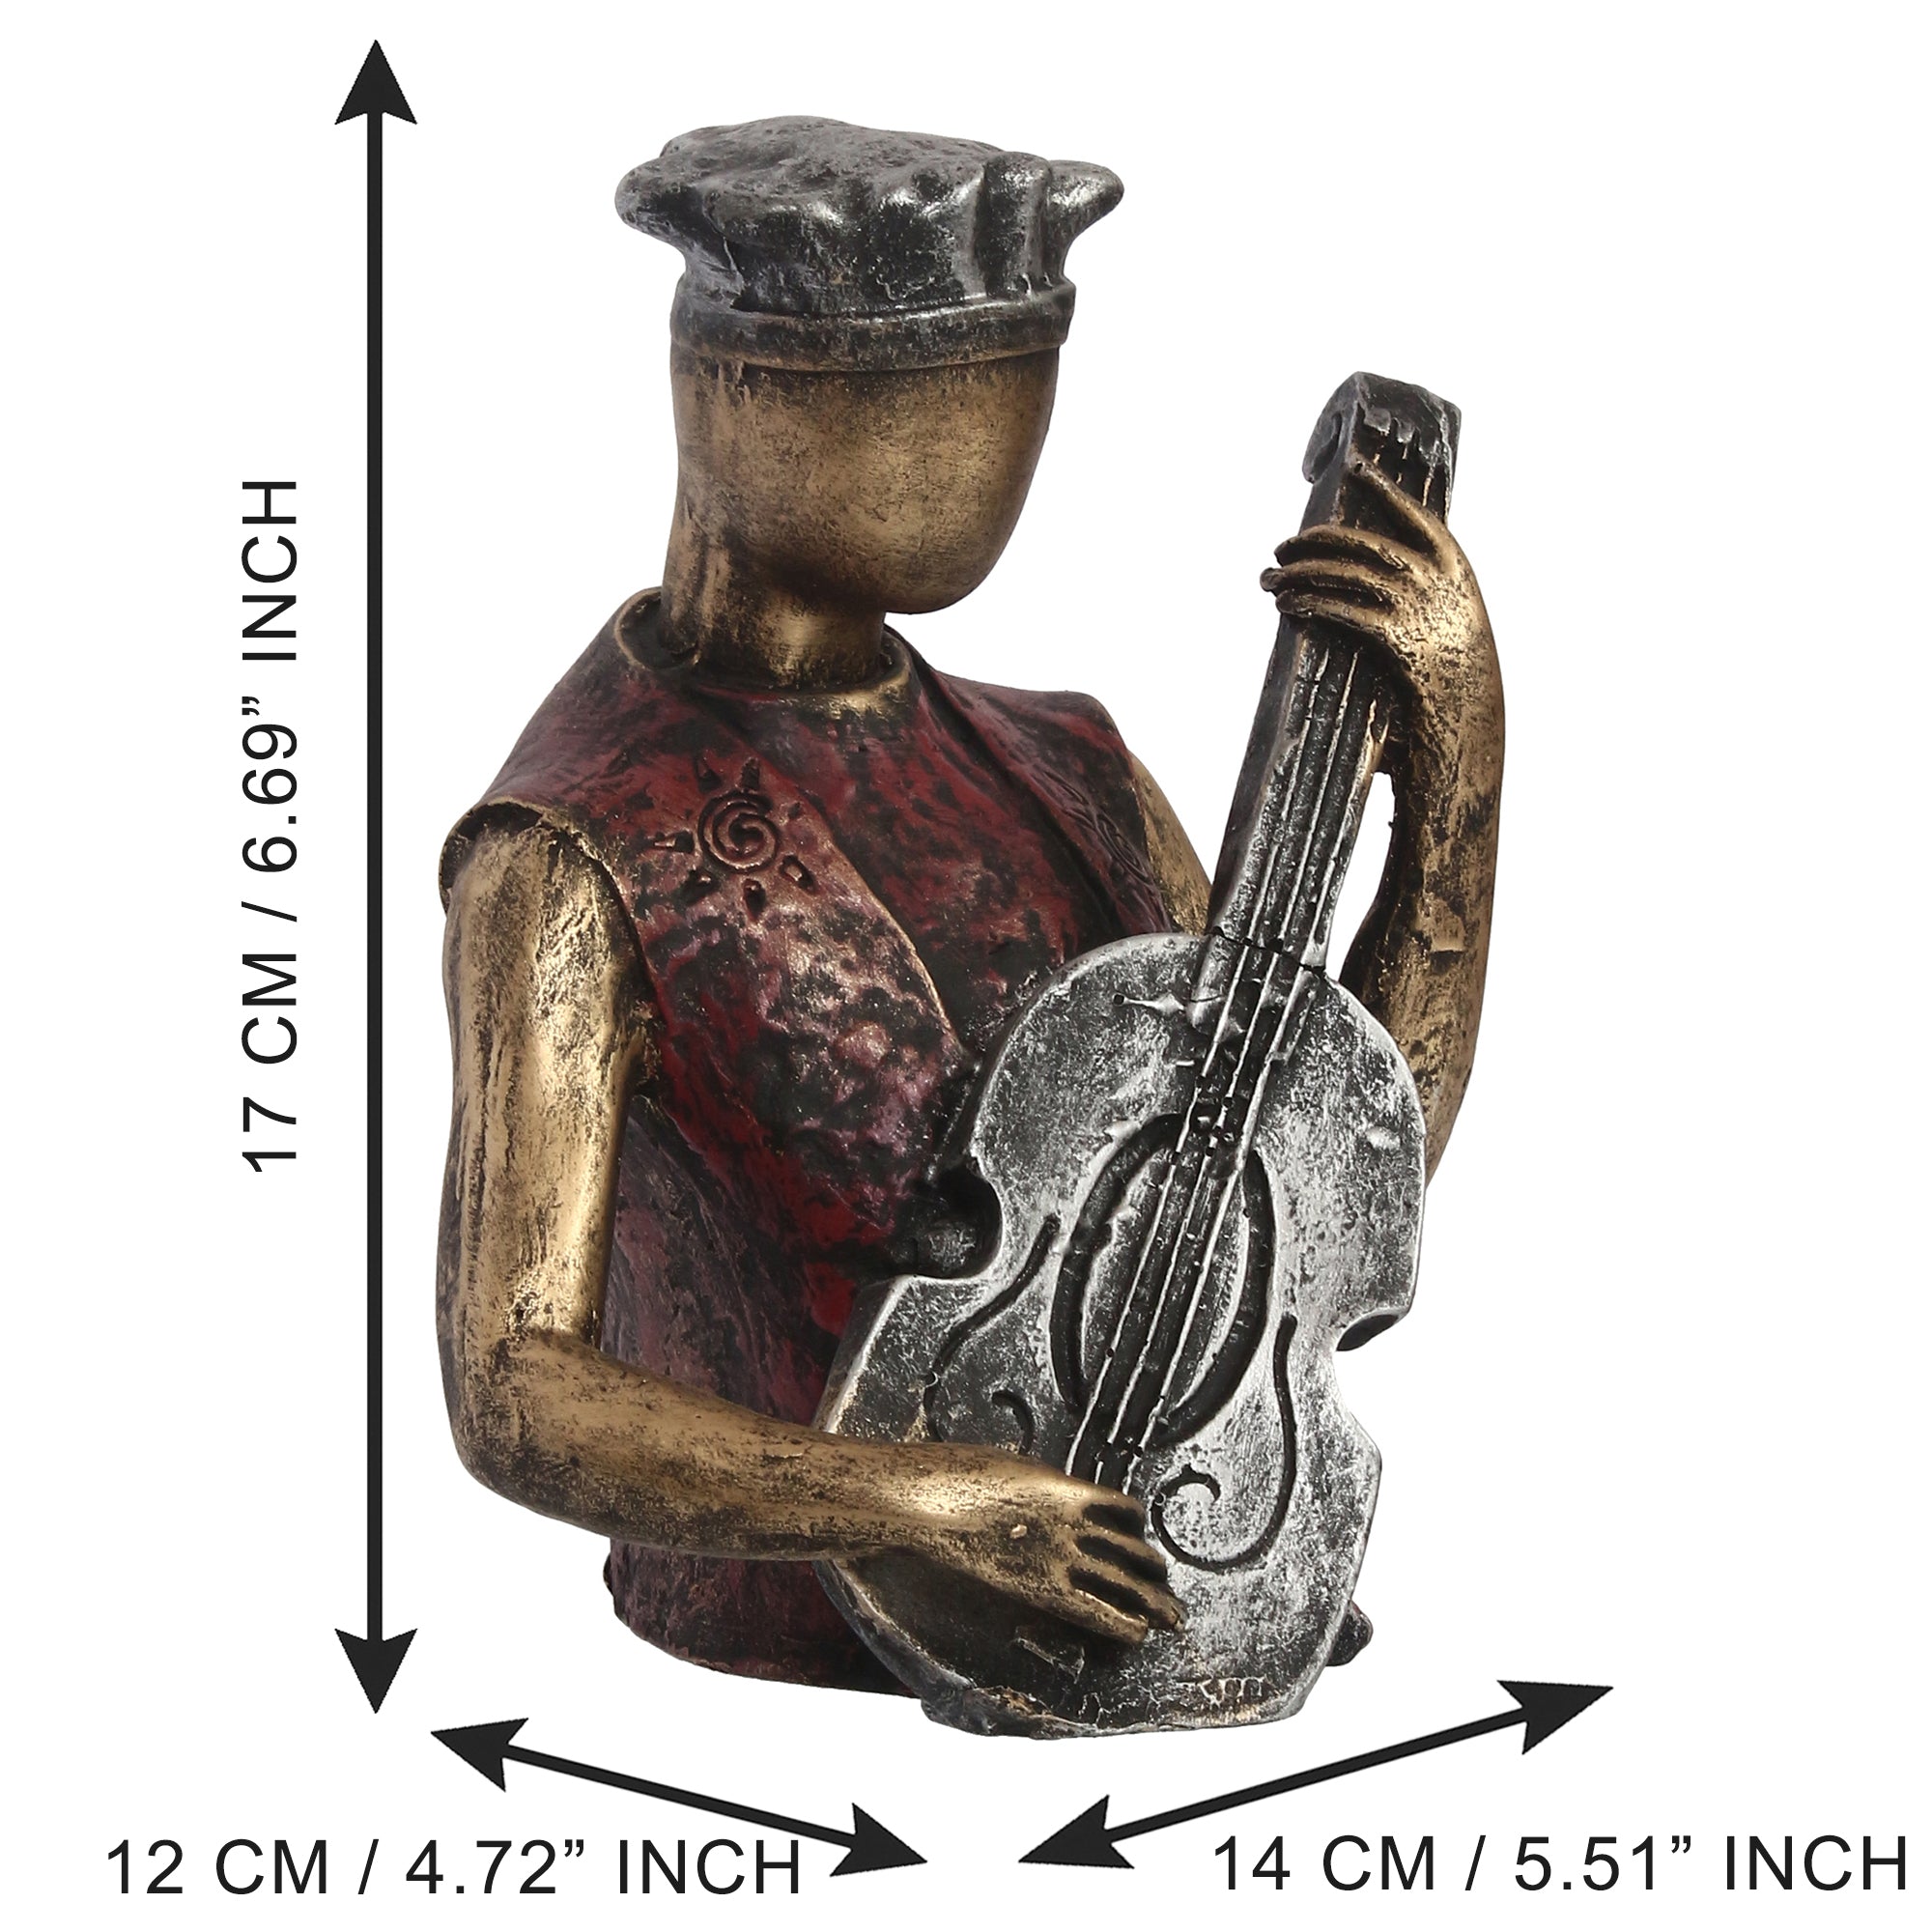 Man Figurine with Hat playing Guitar Musical Instrument (Brown, Silver and Golden) 2